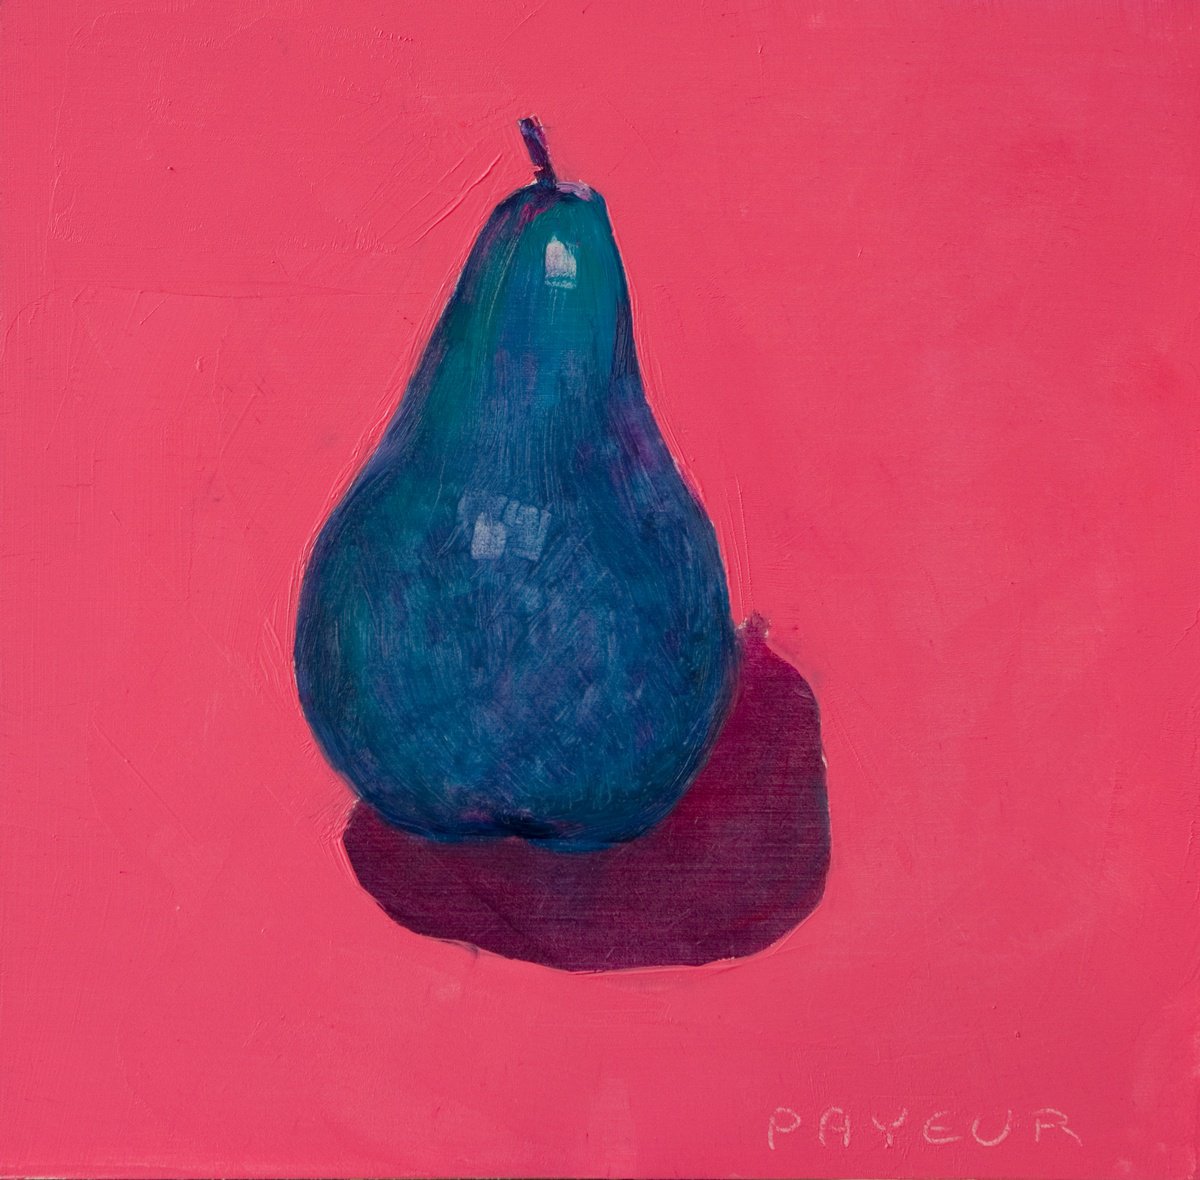 modern still life of blue pear on pink by Olivier Payeur